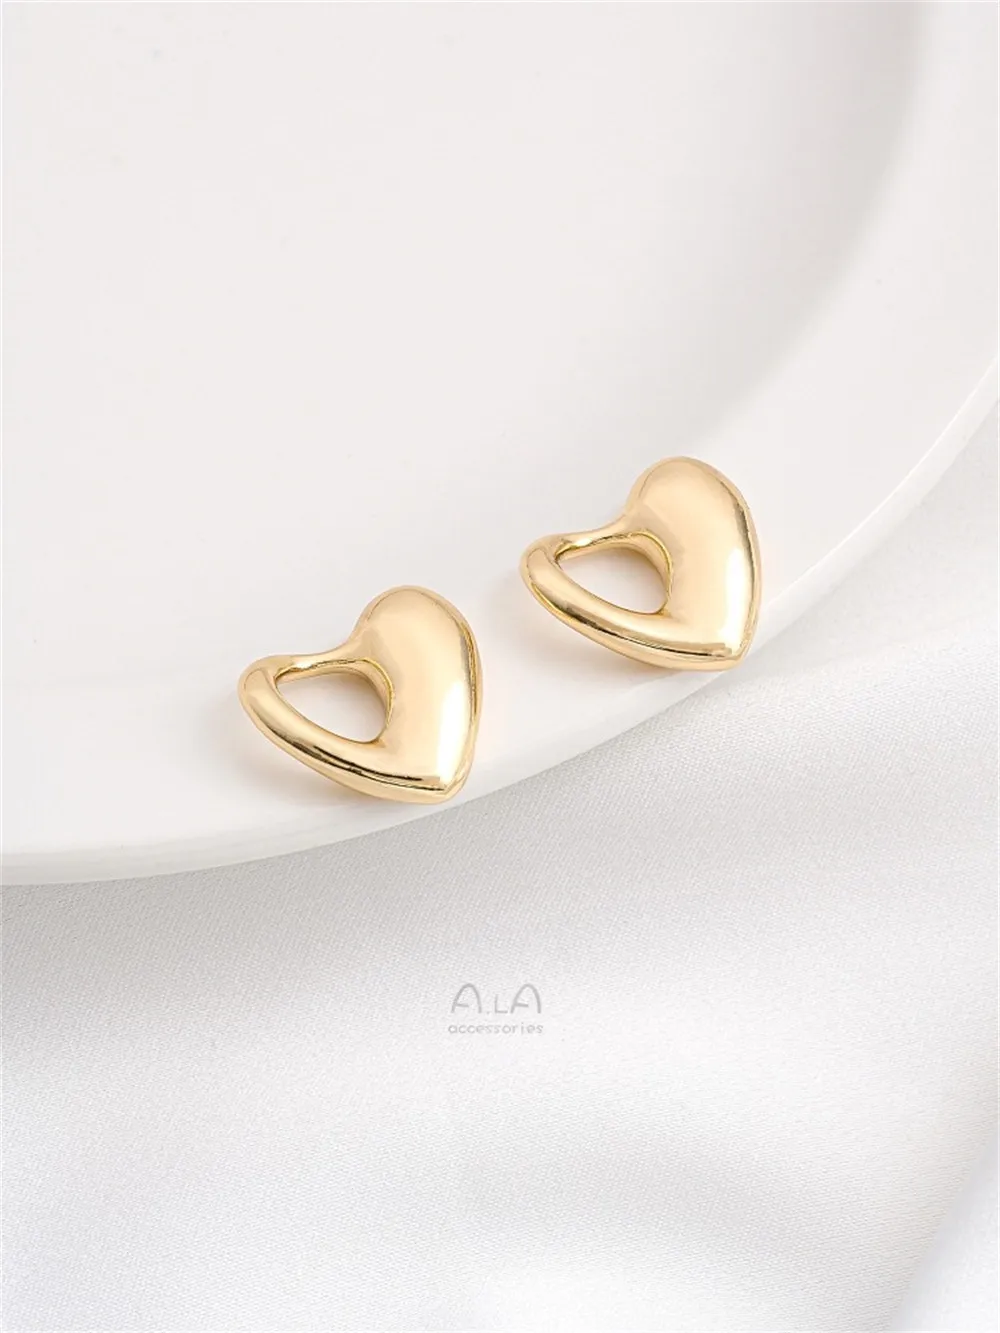 14K Gold-covered, Glossy, Perforated Heart Pendant, Love Jewelry Pendant, Handmade Diy Necklace Charms Pendant K586